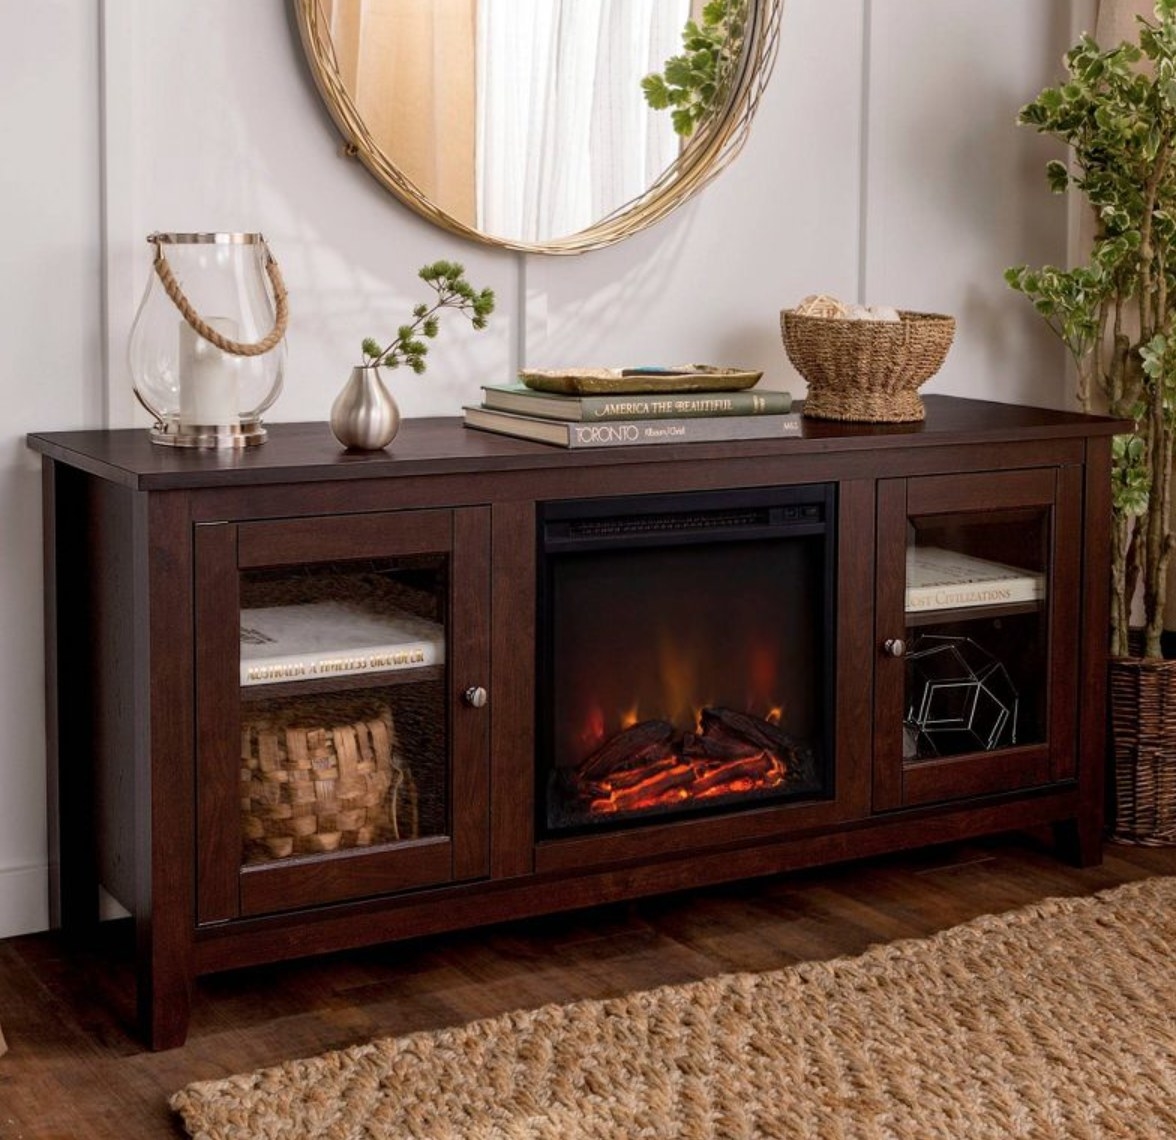 the tv stand with a fireplace